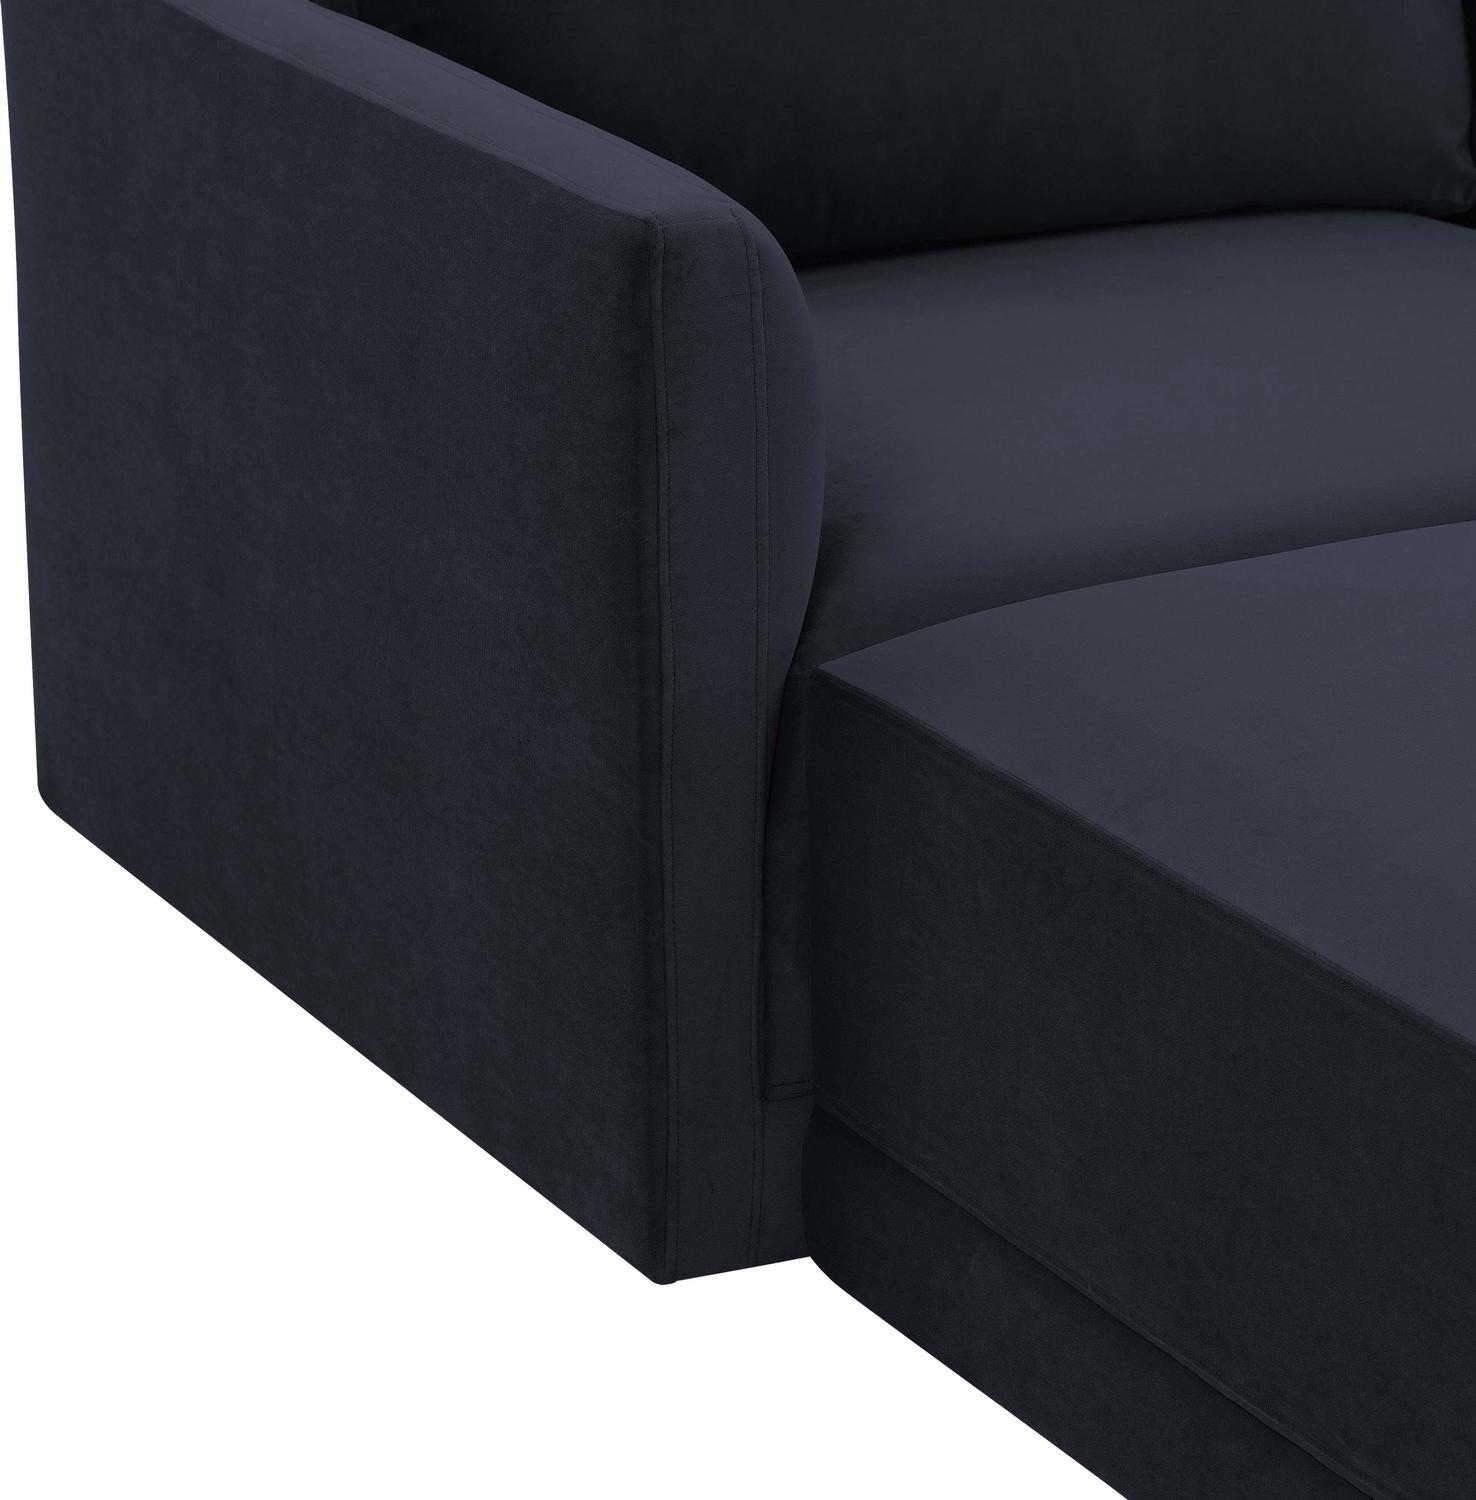 small green sectional sofa Tov Furniture Sectionals Navy